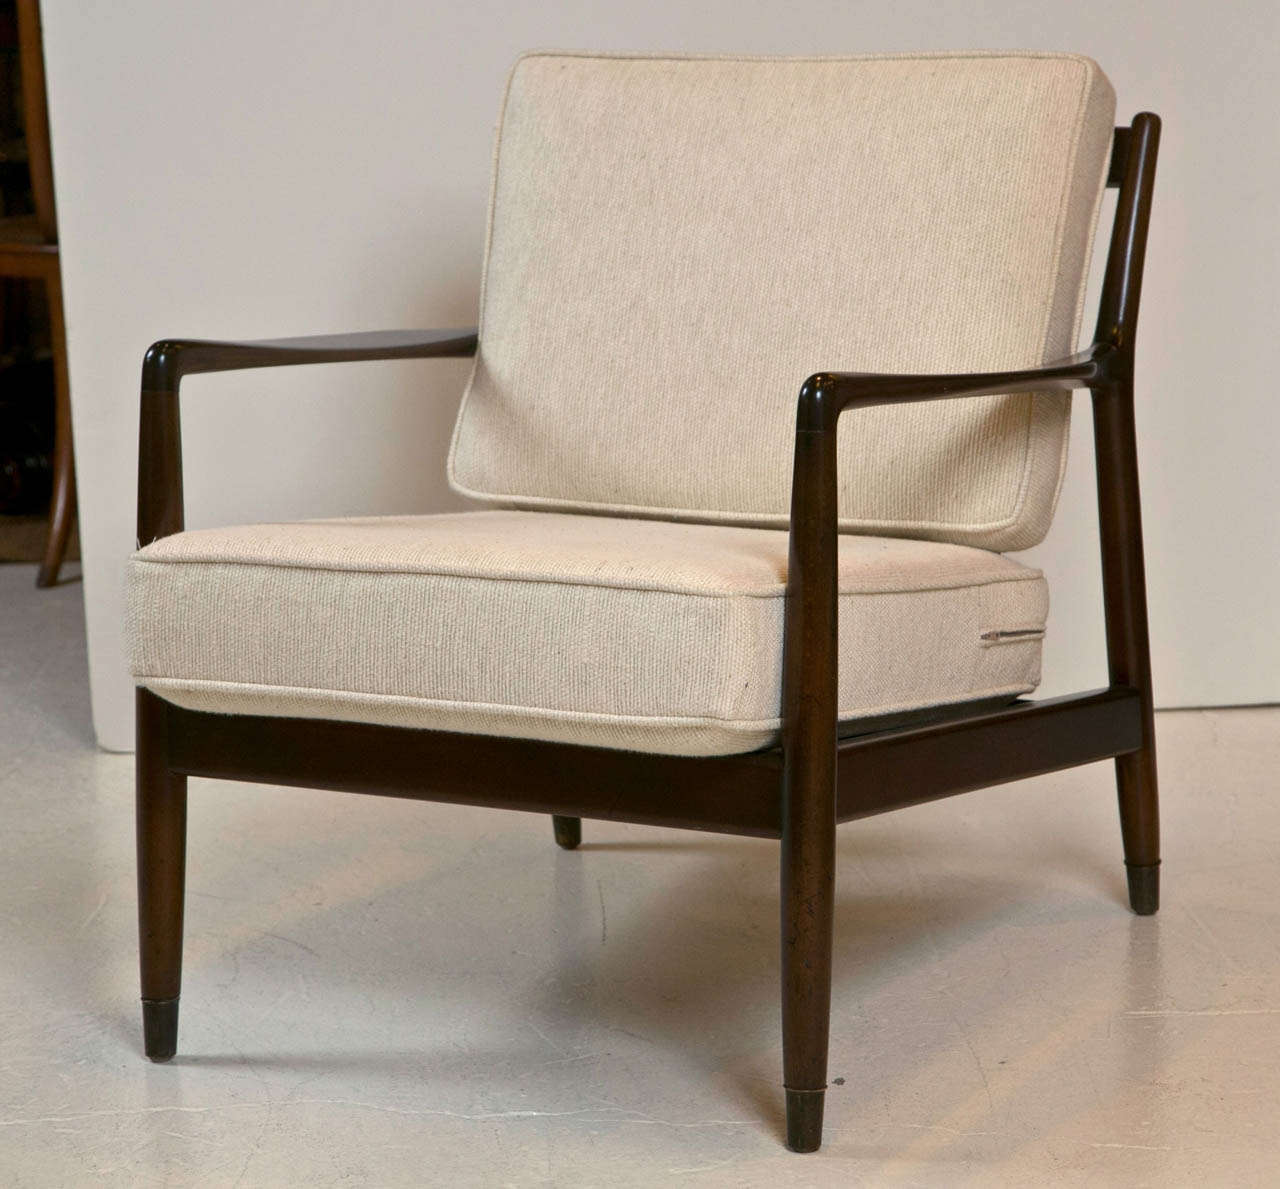 Mid-1960's lounge chair by Dux of Sweden.  Newly refinished walnut frame & new cushion & upholstery.  Brass capped feet.